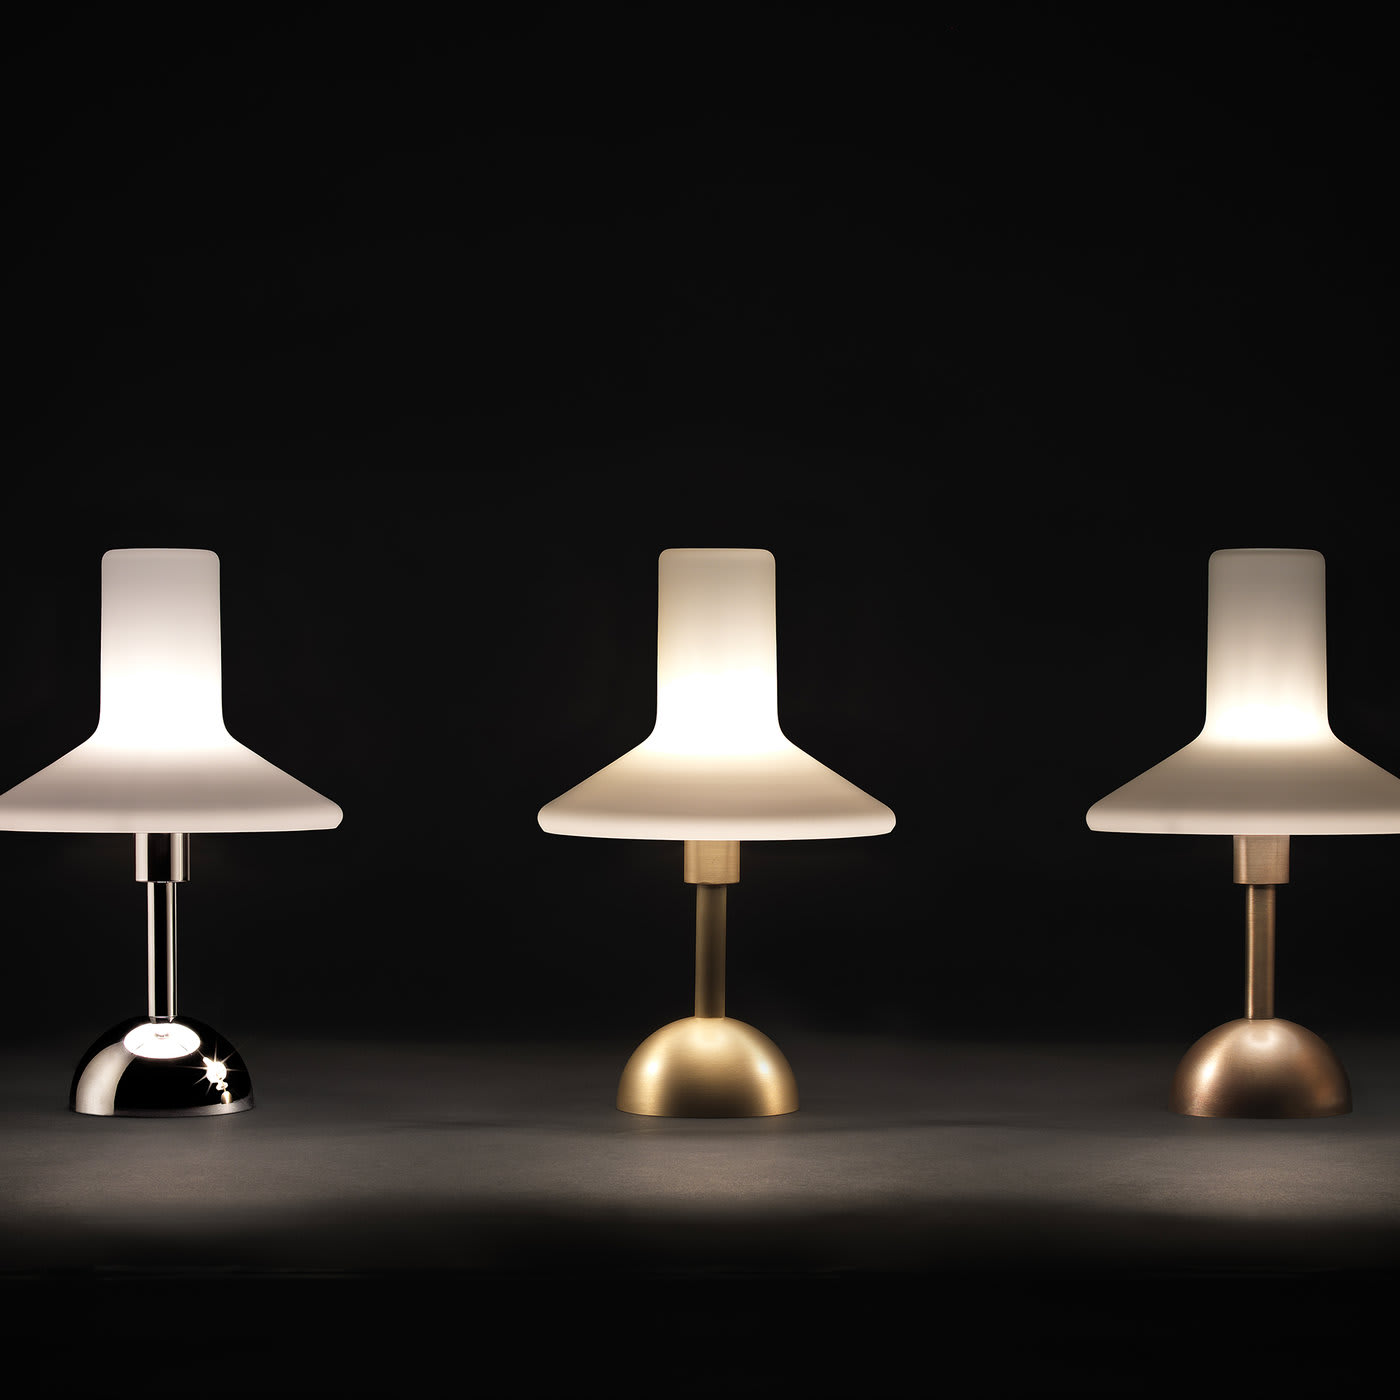 Olly Large Table Lamp - Tato